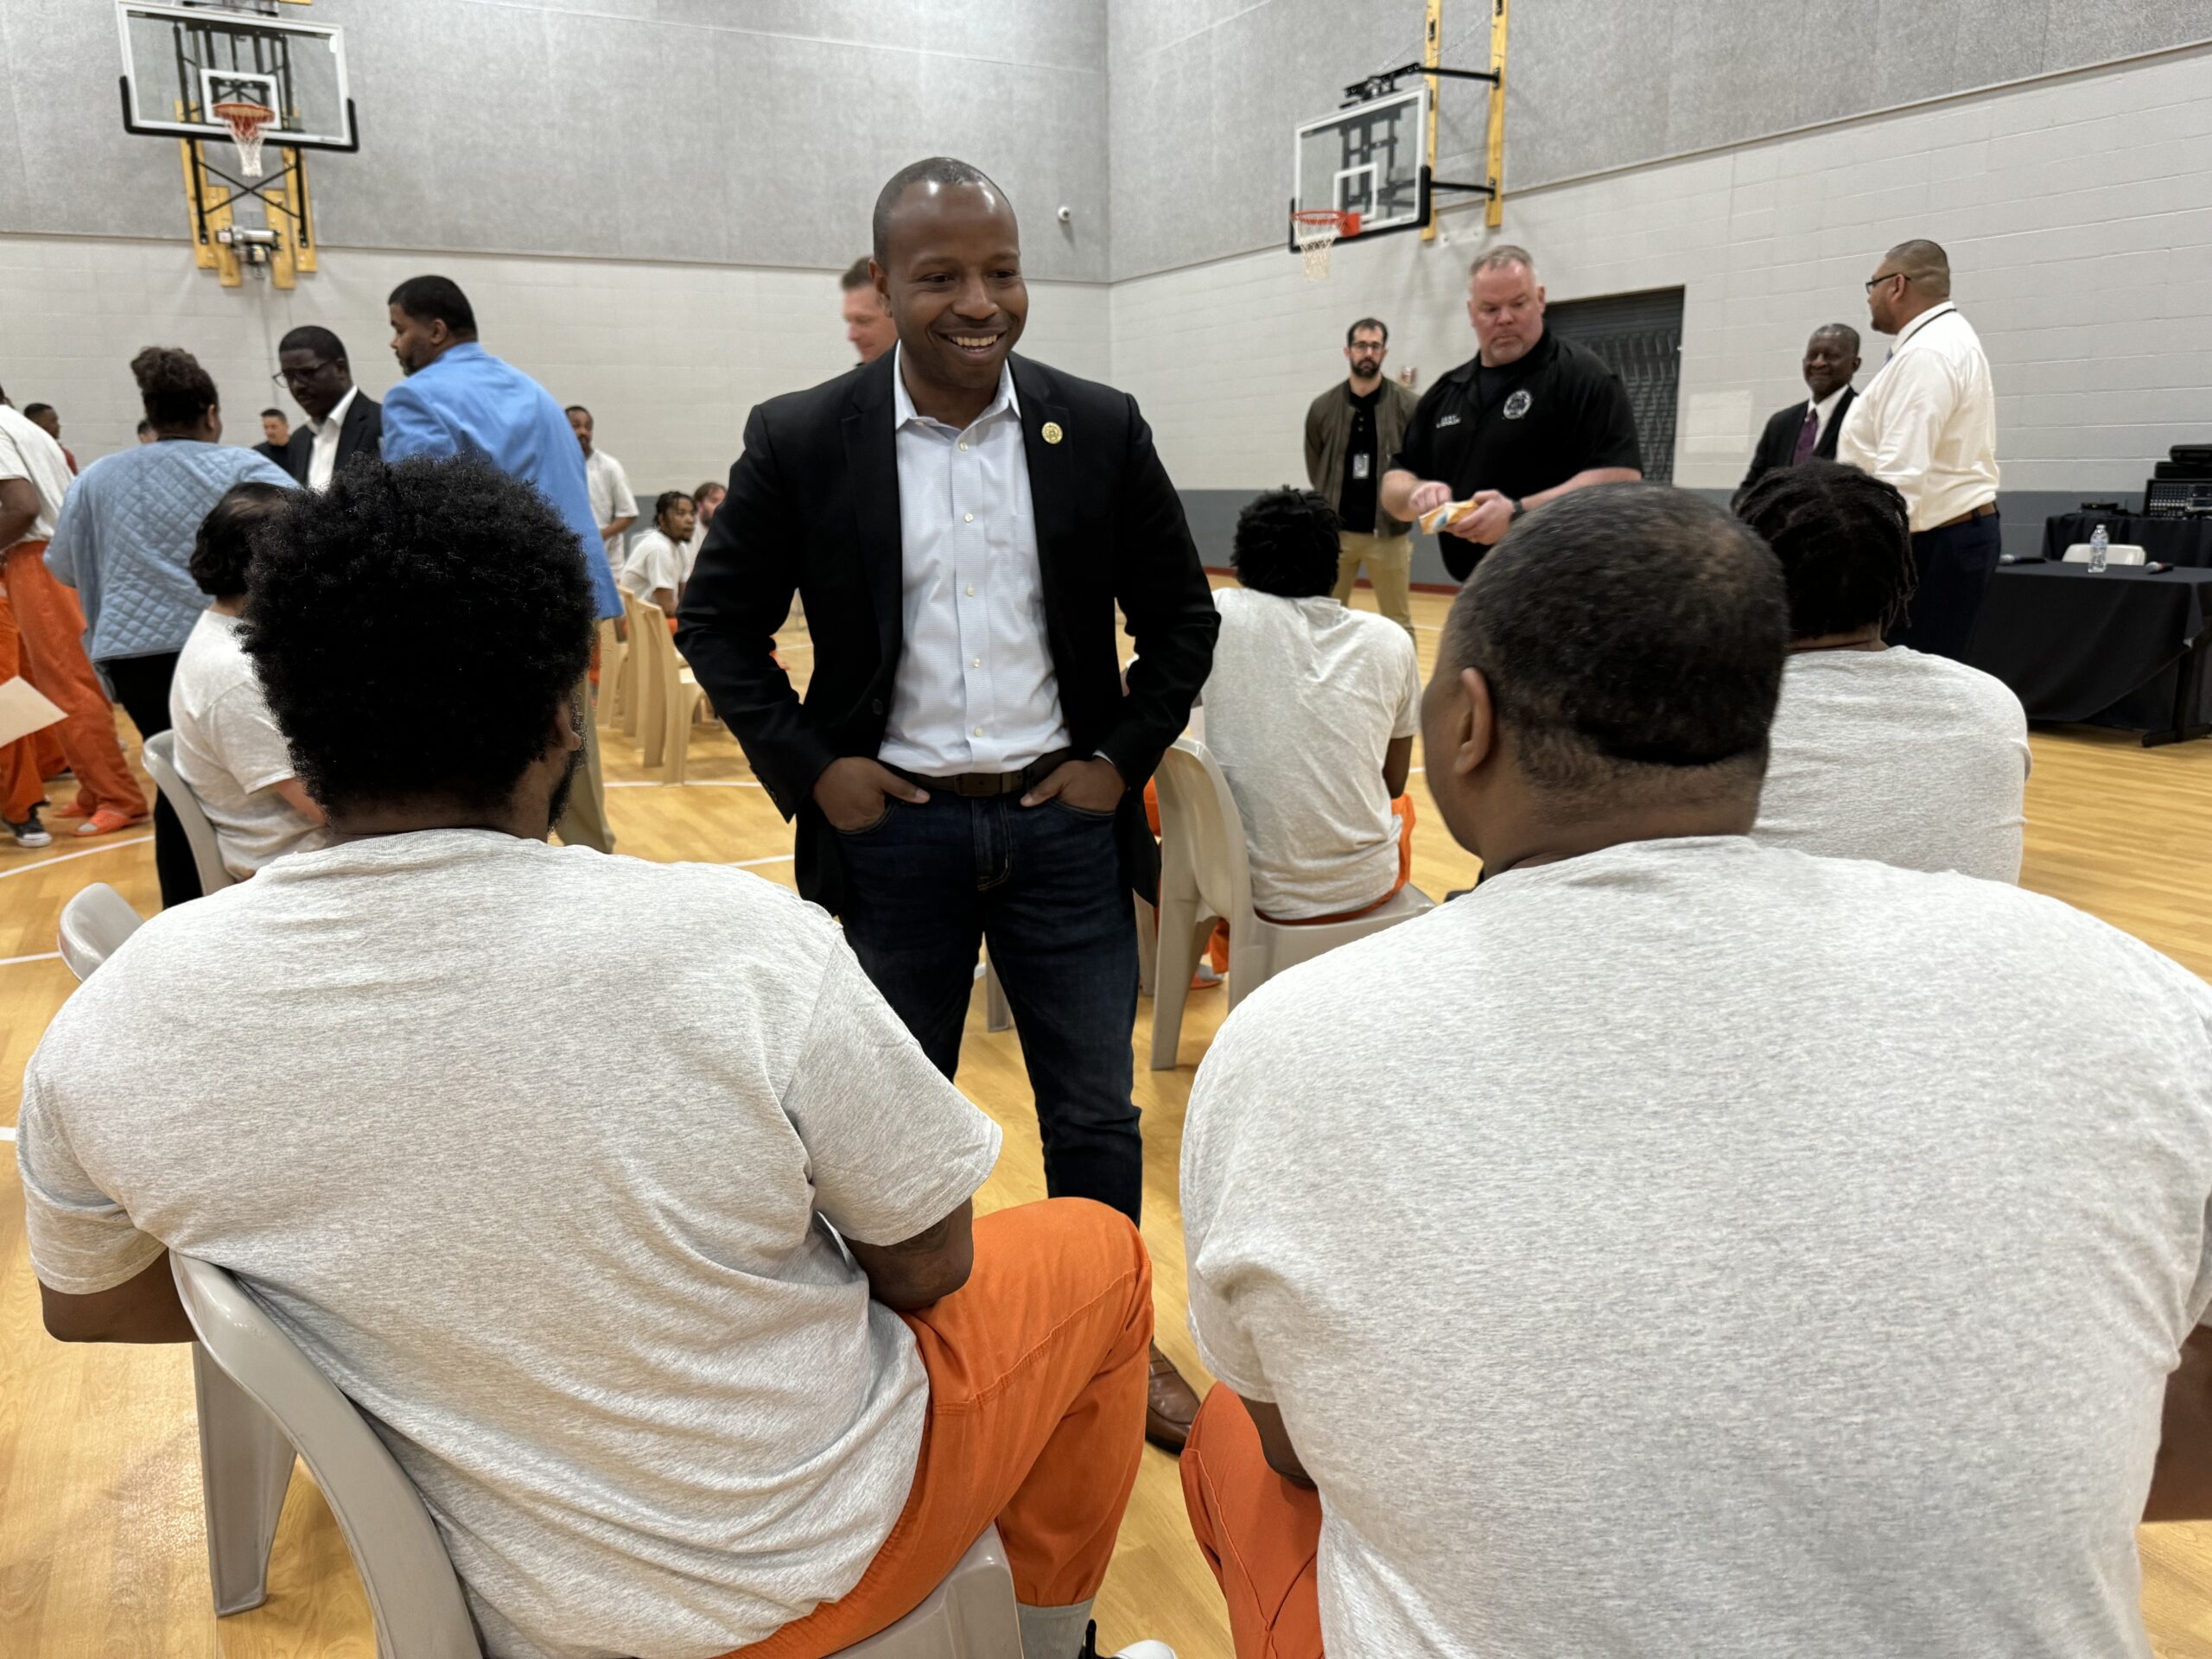 ‘Hope to the hopeless’: Incarcerated people hear directly from Milwaukee officials 